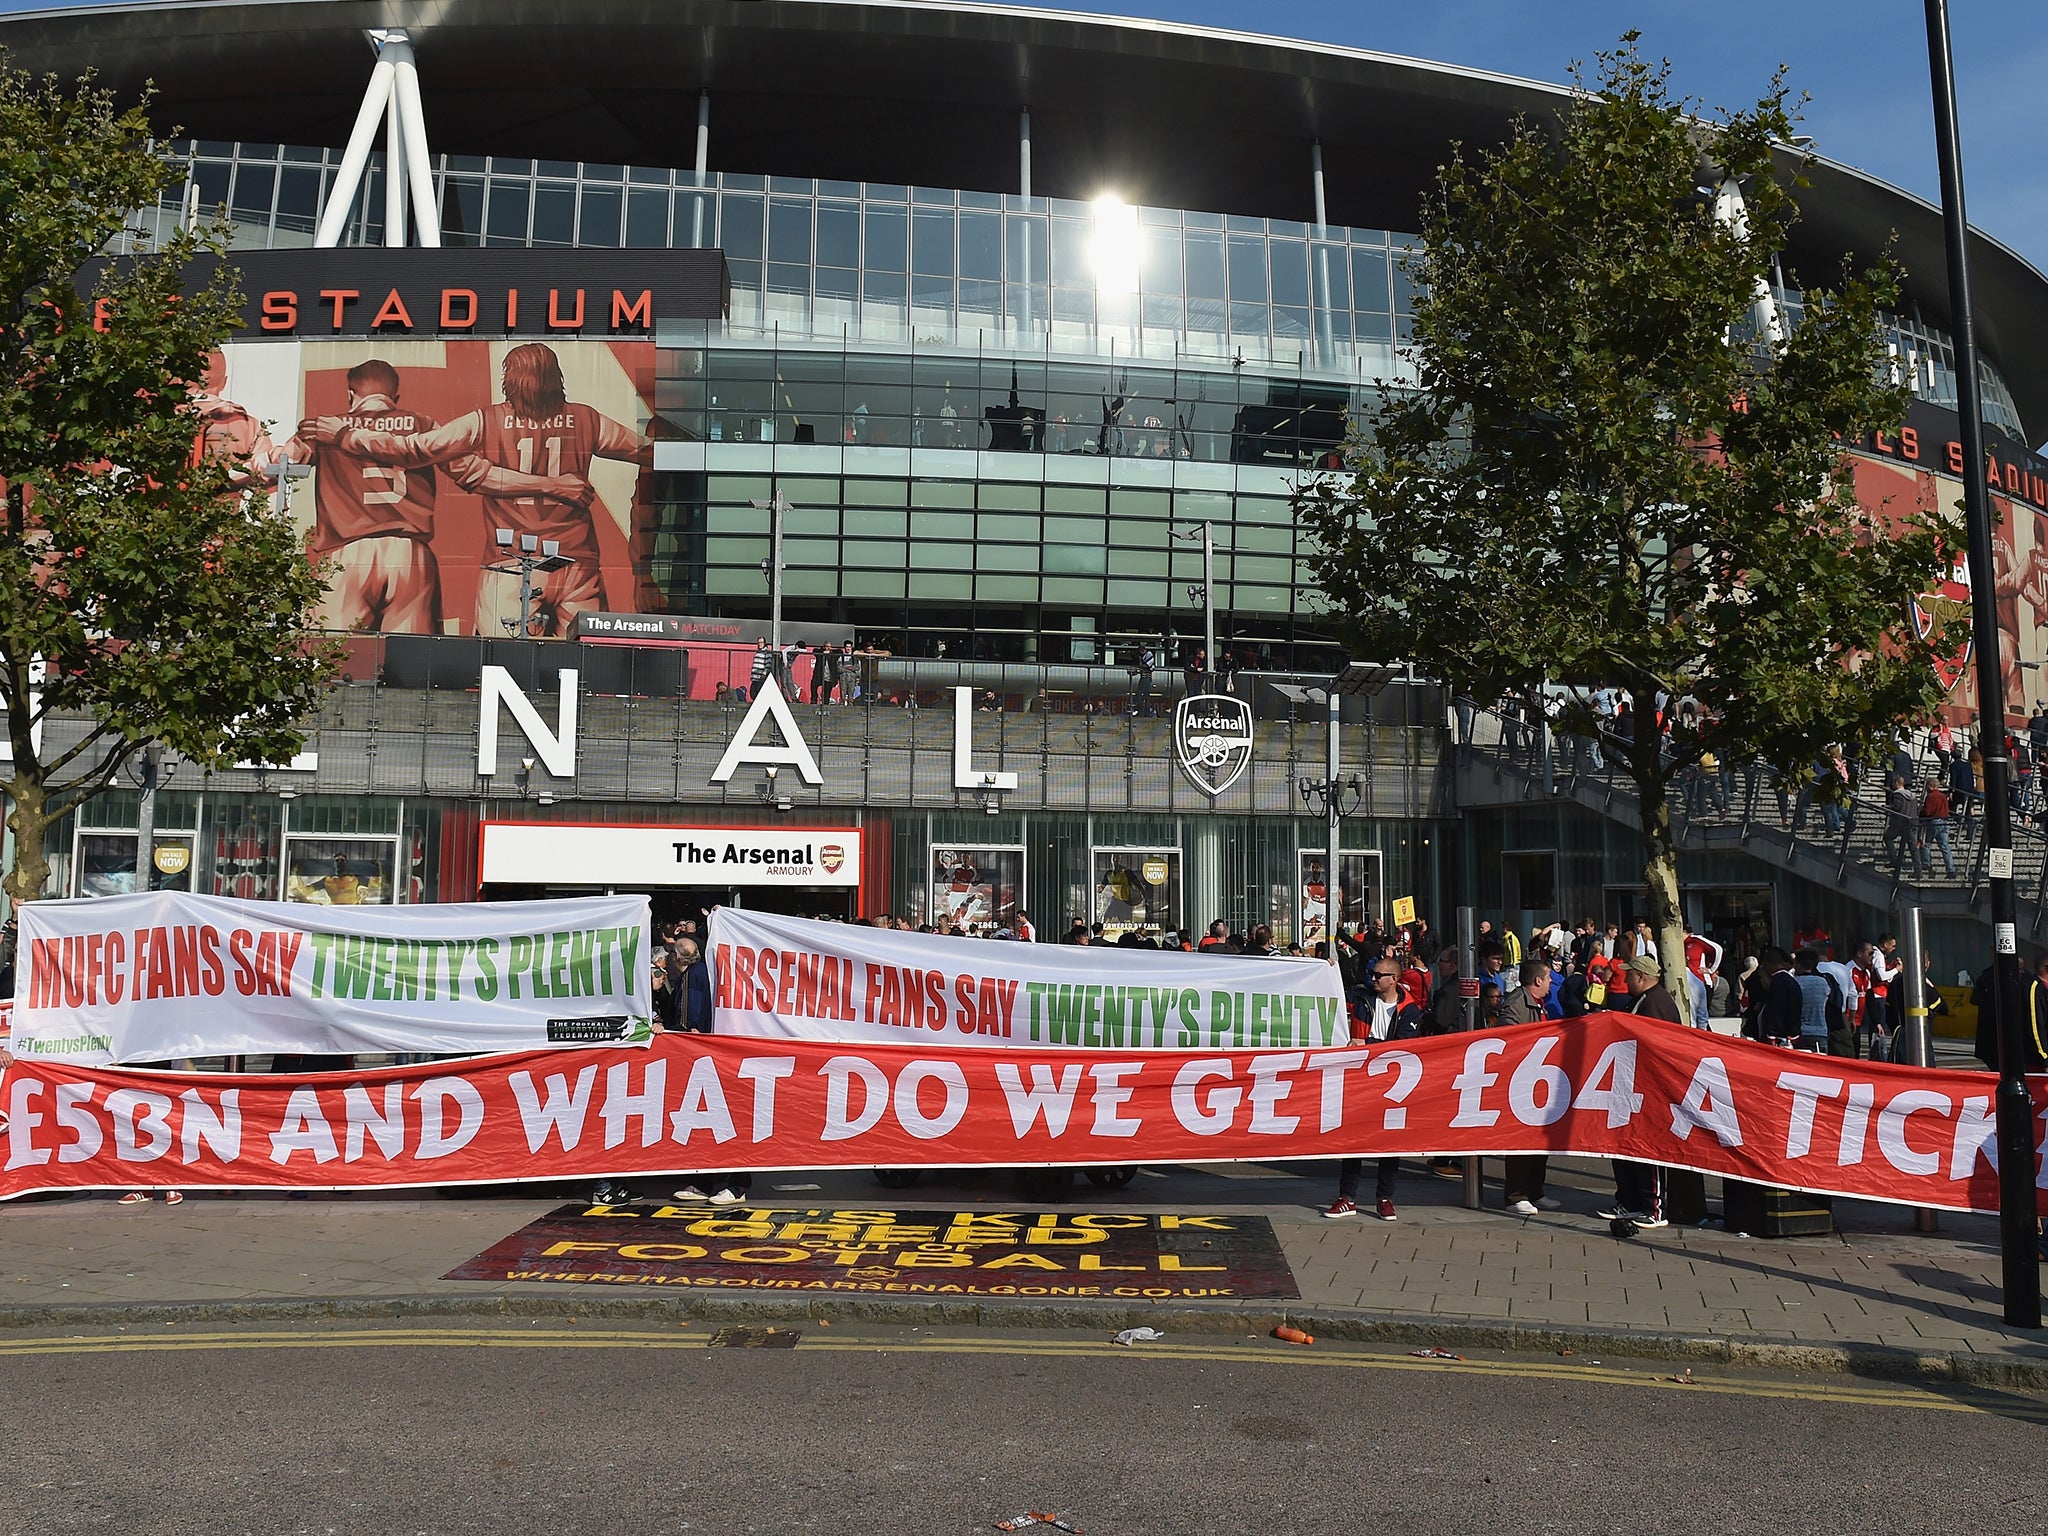 A banner in protest at ticket prices at the Emirates before Arsenal vs Liverpool in April